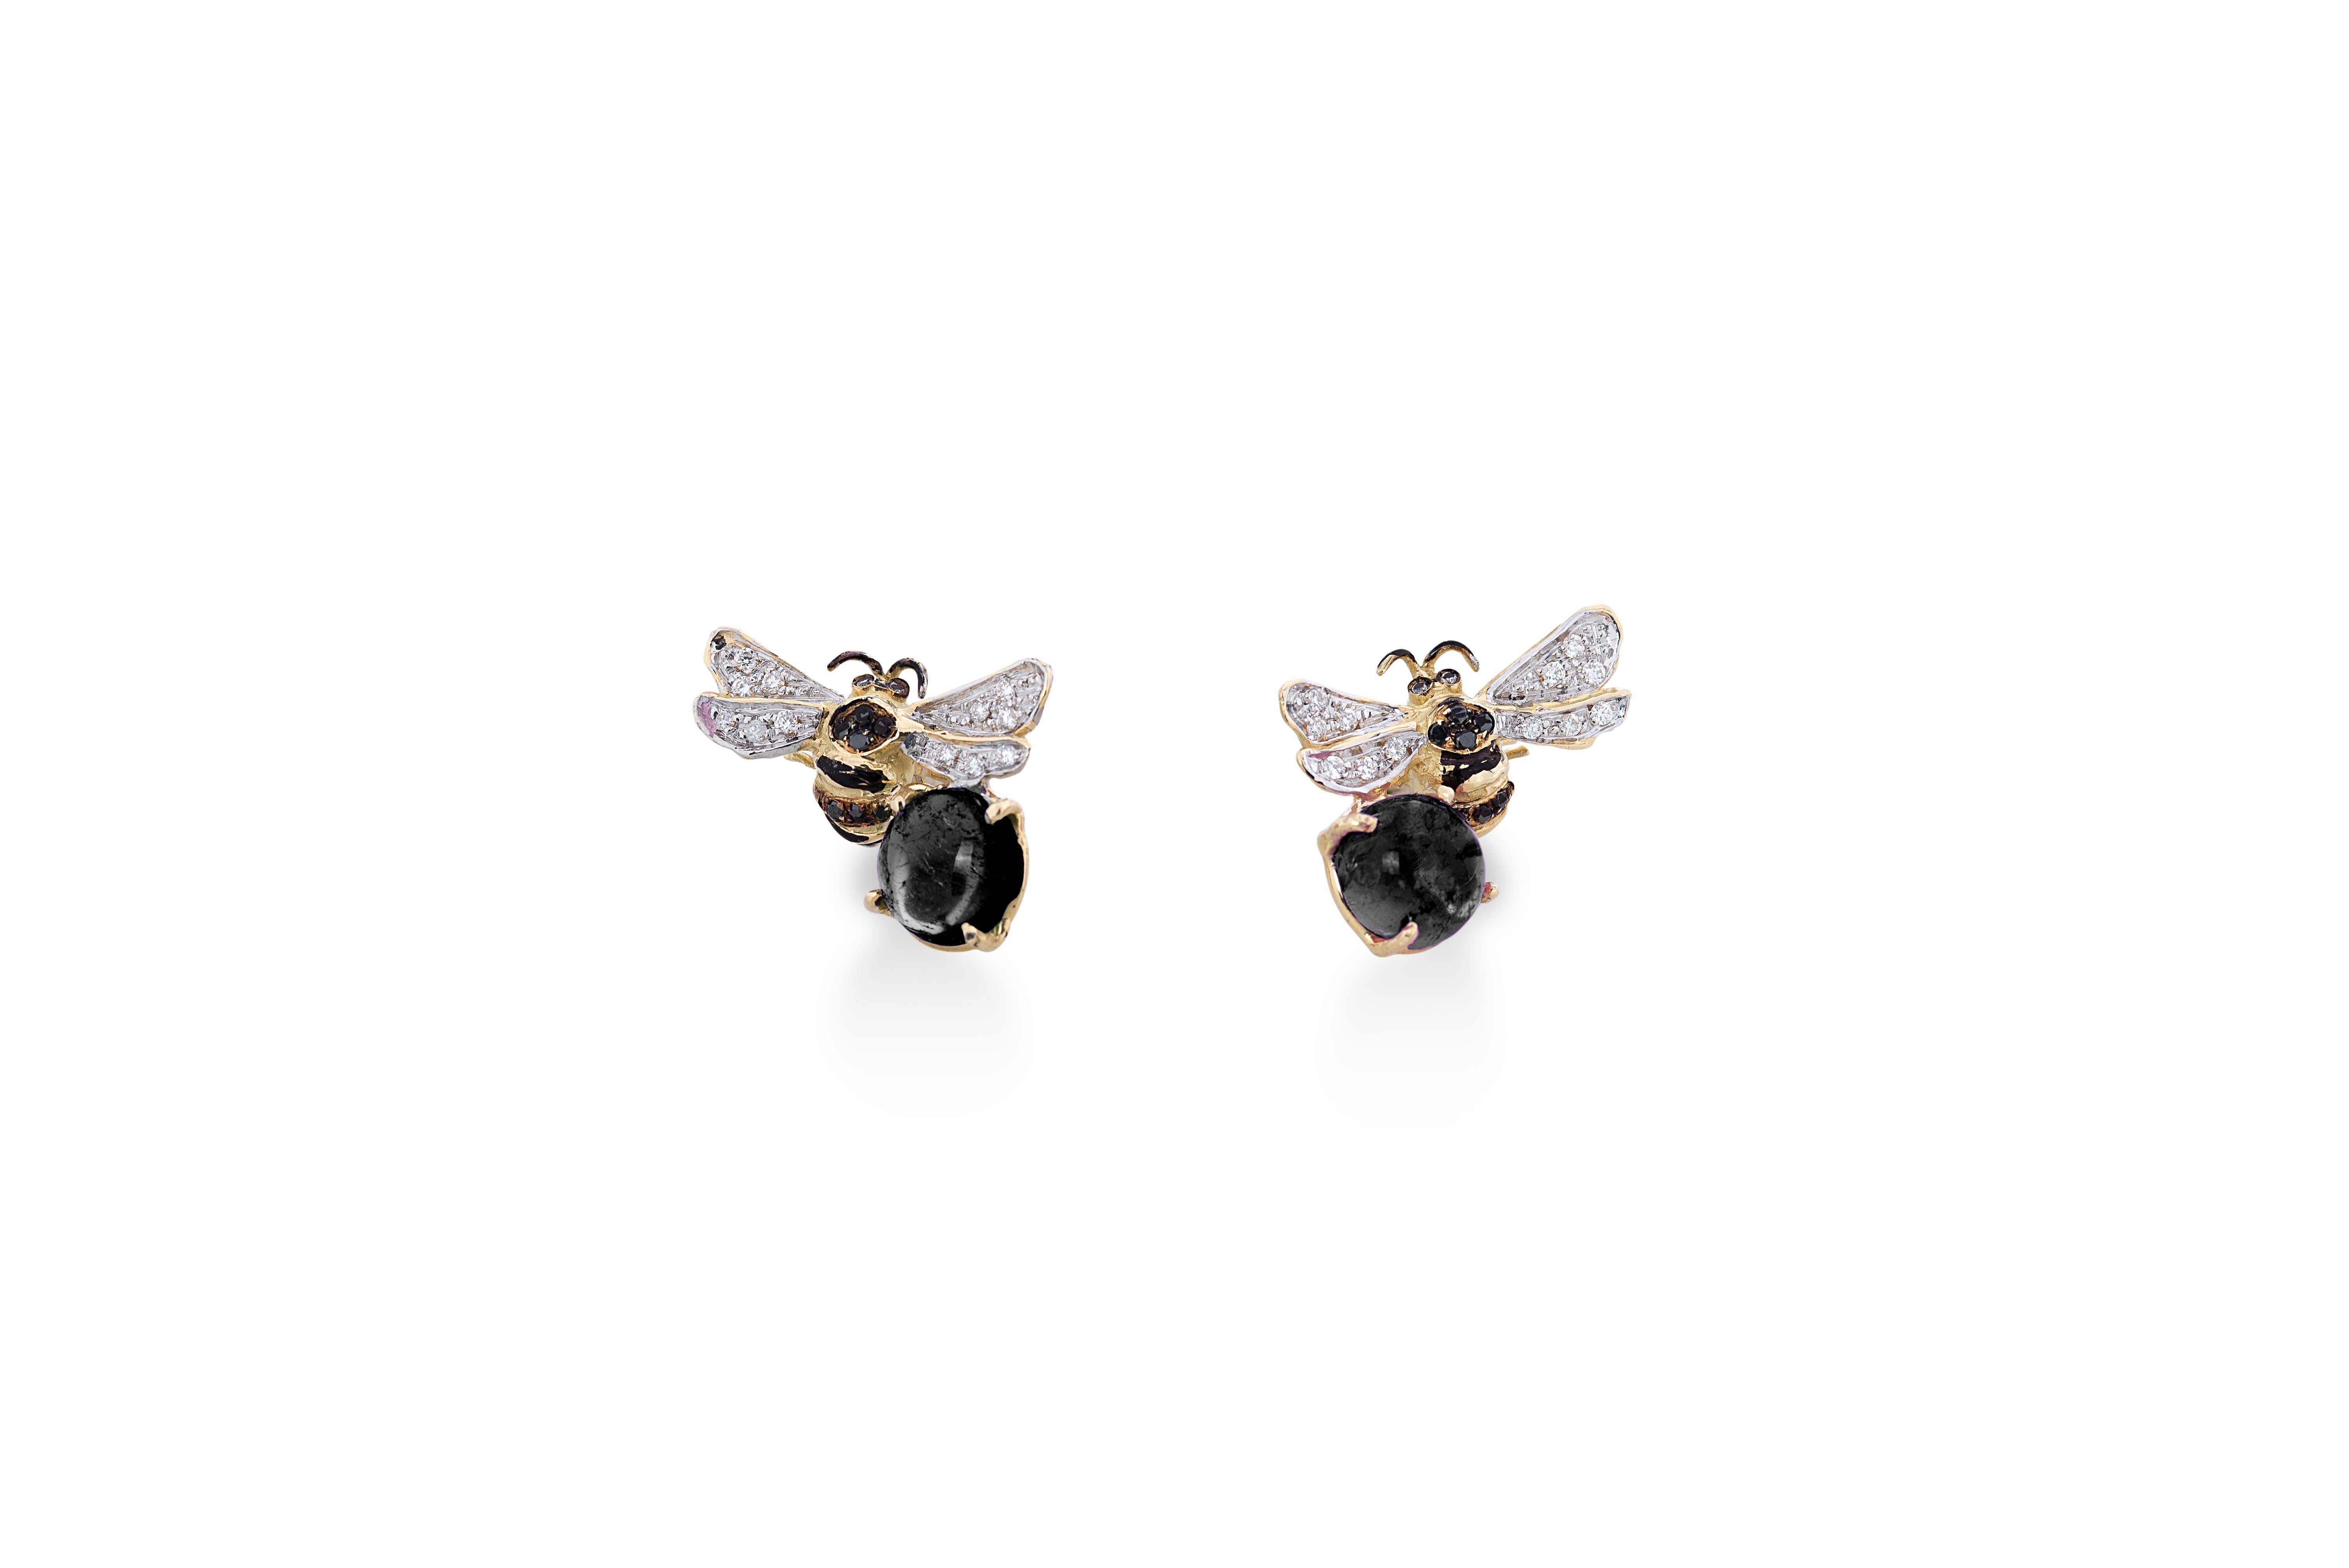 Handcrafted 18 Karat Yellow Gold Onyx 0.16 Karat White Diamond 0.18 Karat Black Diamonds Bees Stud Earrings
Here there is a pair of  Artisanal Bees Stud Earrings handcrafted in 18 Karats Yellow Gold and adorned with a deep black onyx, white and